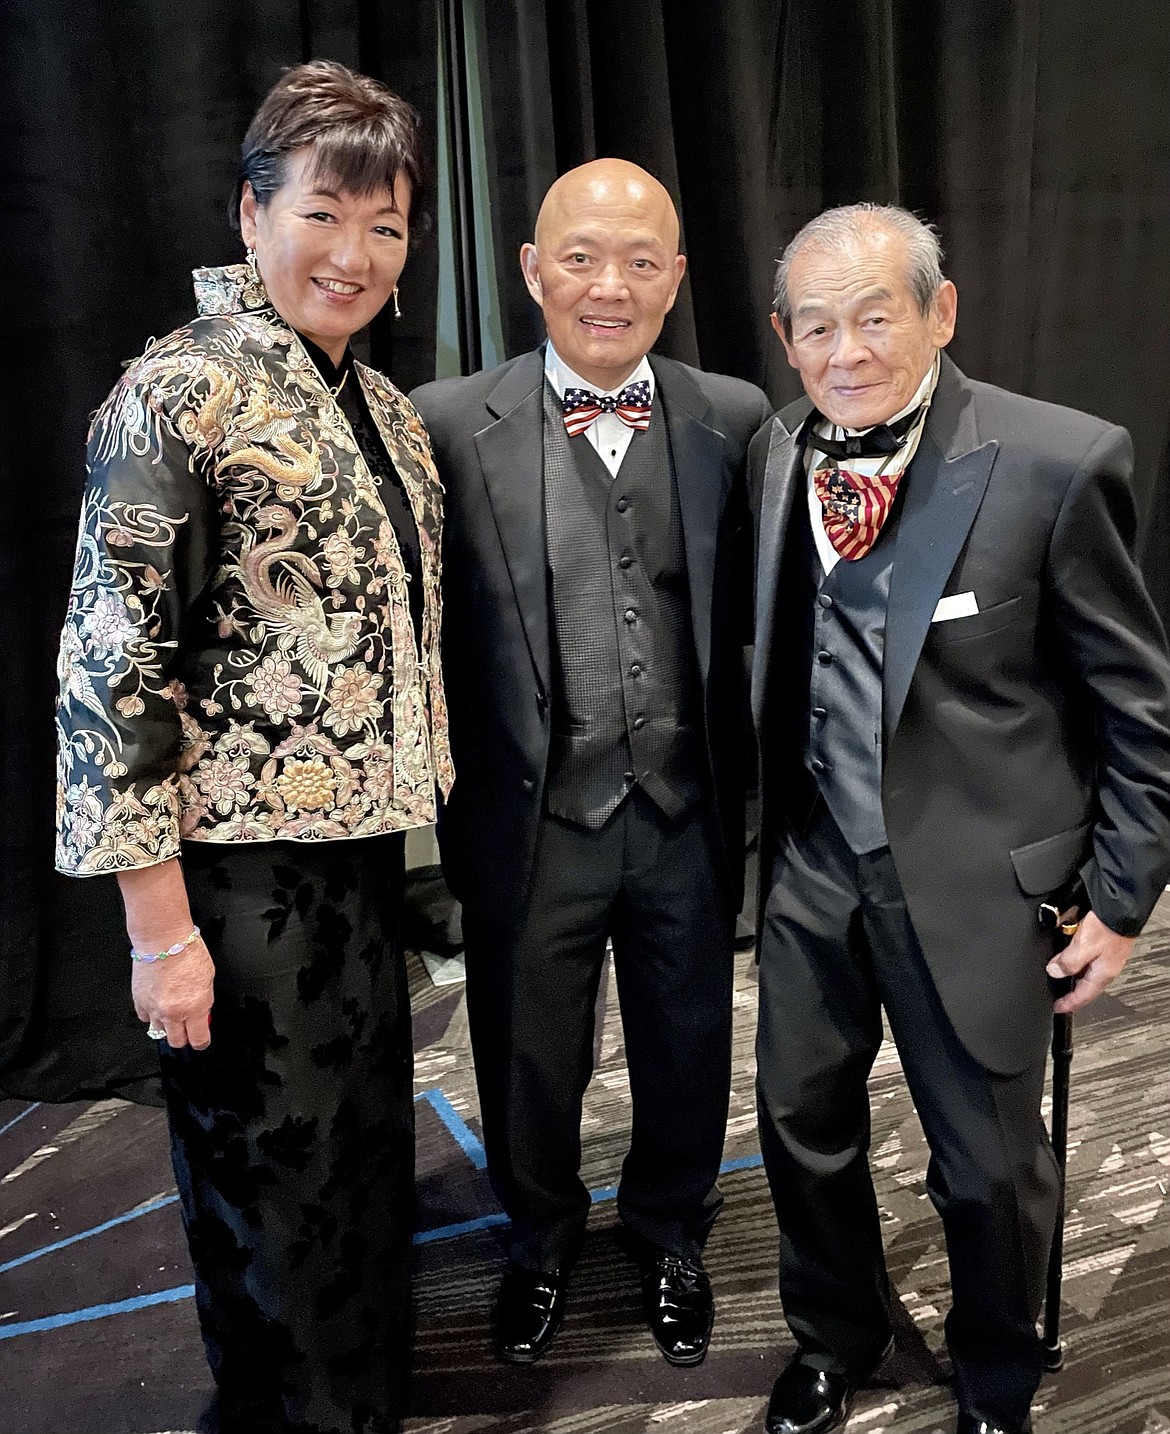 George Dong, right, is pictured at a ceremony presenting the Congressional Gold Medal awarded to Chinese American veterans of World War II. "There were four living veterans receiving this award," said Dong's daughter, Delia Freney, who also received a medal posthumously for her mother's brother, Harold Sam. "My dad wore a tuxedo as he proudly walked to center stage to receive his medal. The medals received were bronze duplicates and the actual Gold Medal was on display. It will be in the Smithsonian Museum next year."